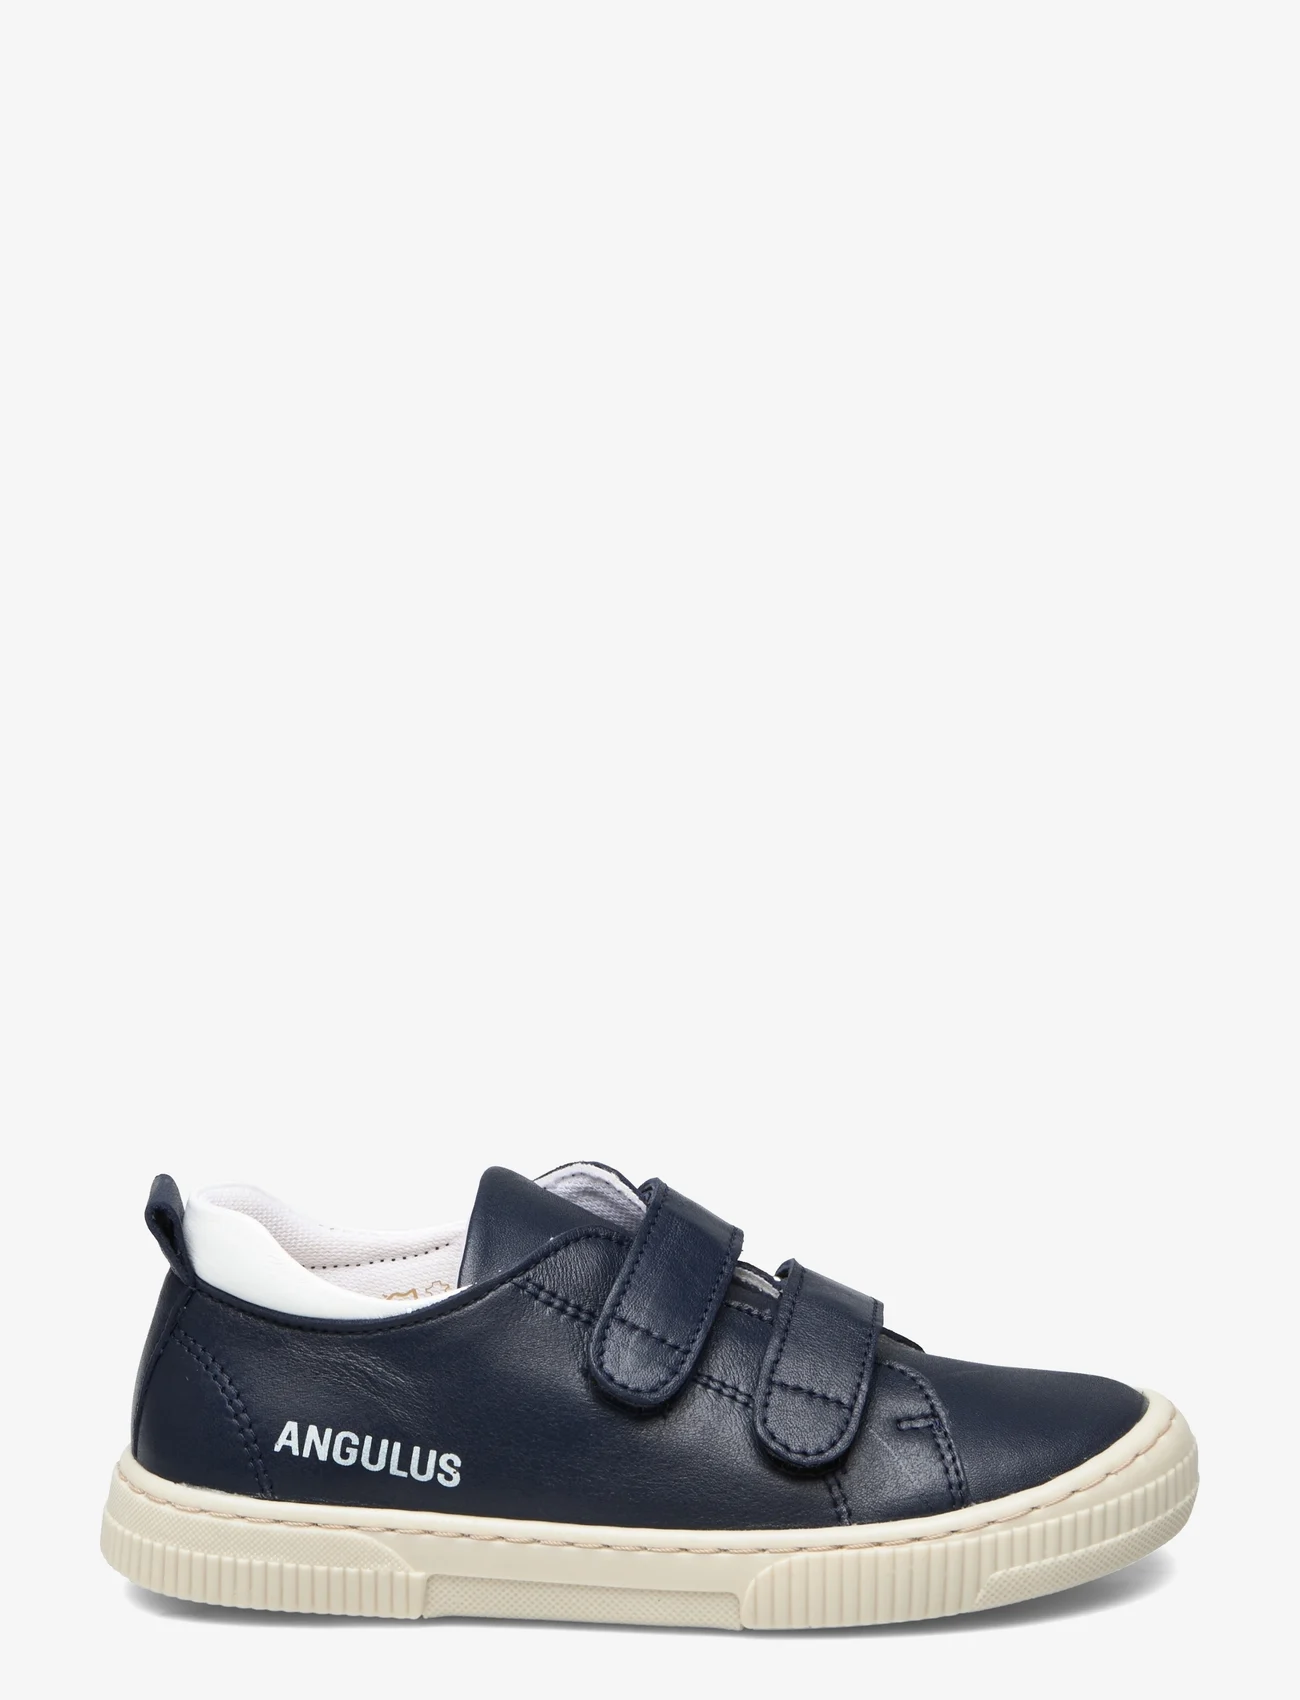 ANGULUS - Shoes - flat - with velcro - sommarfynd - 2585/1521 navy/white - 1